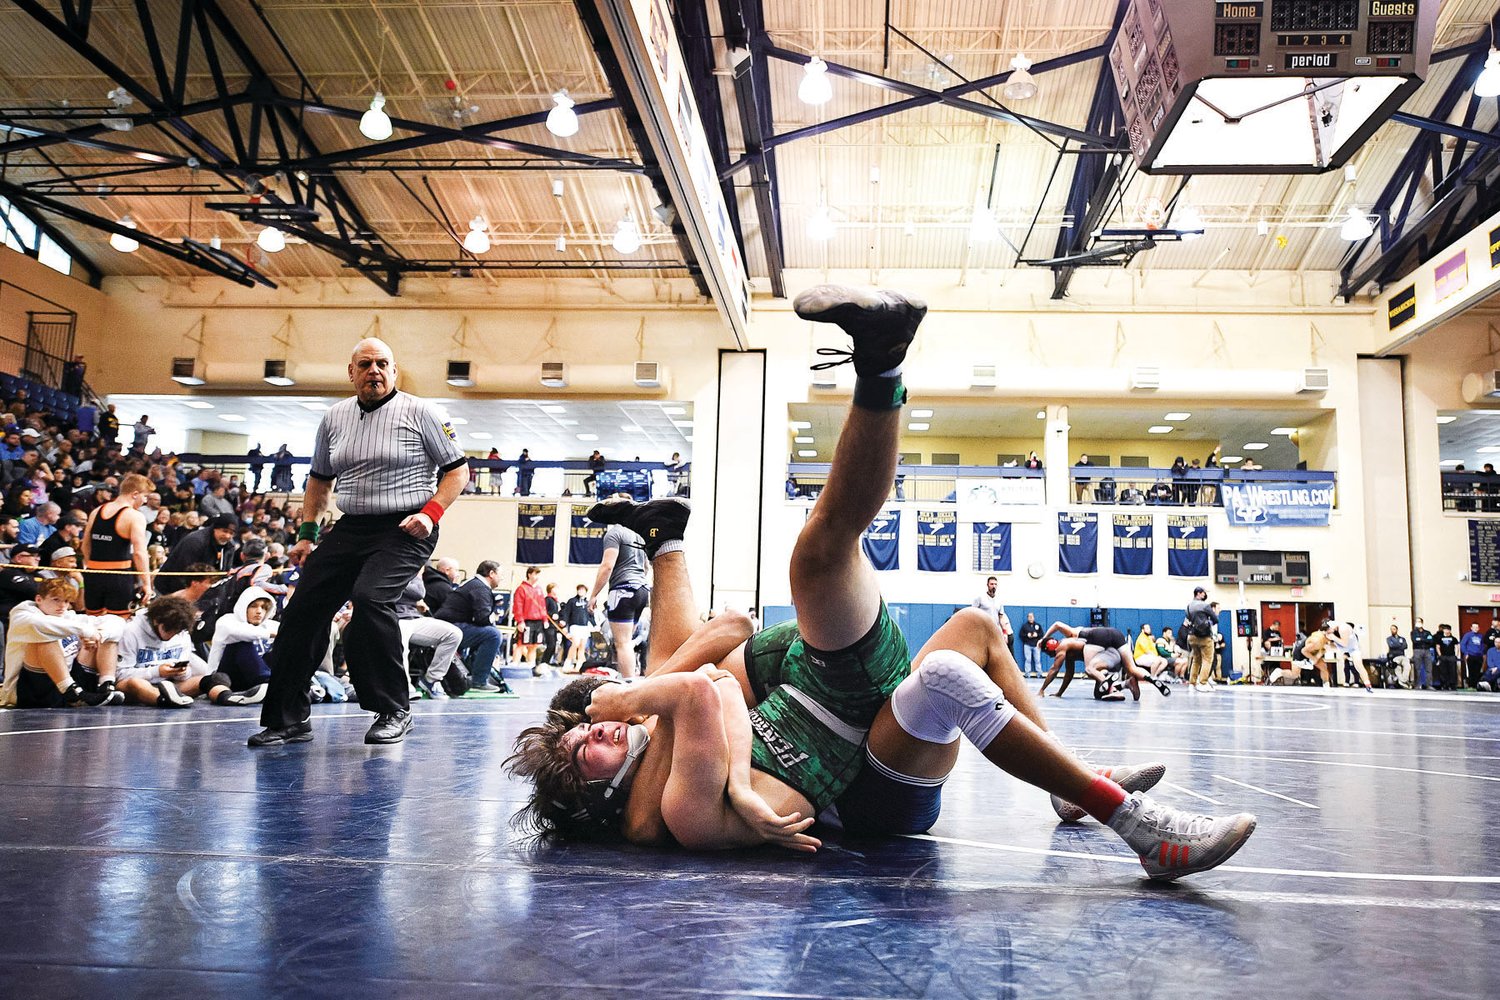 Pennridge’s Ryan Gallagher struggles to get loose during his 15-0 loss to Manheim Township’s Kevin Olavarria.